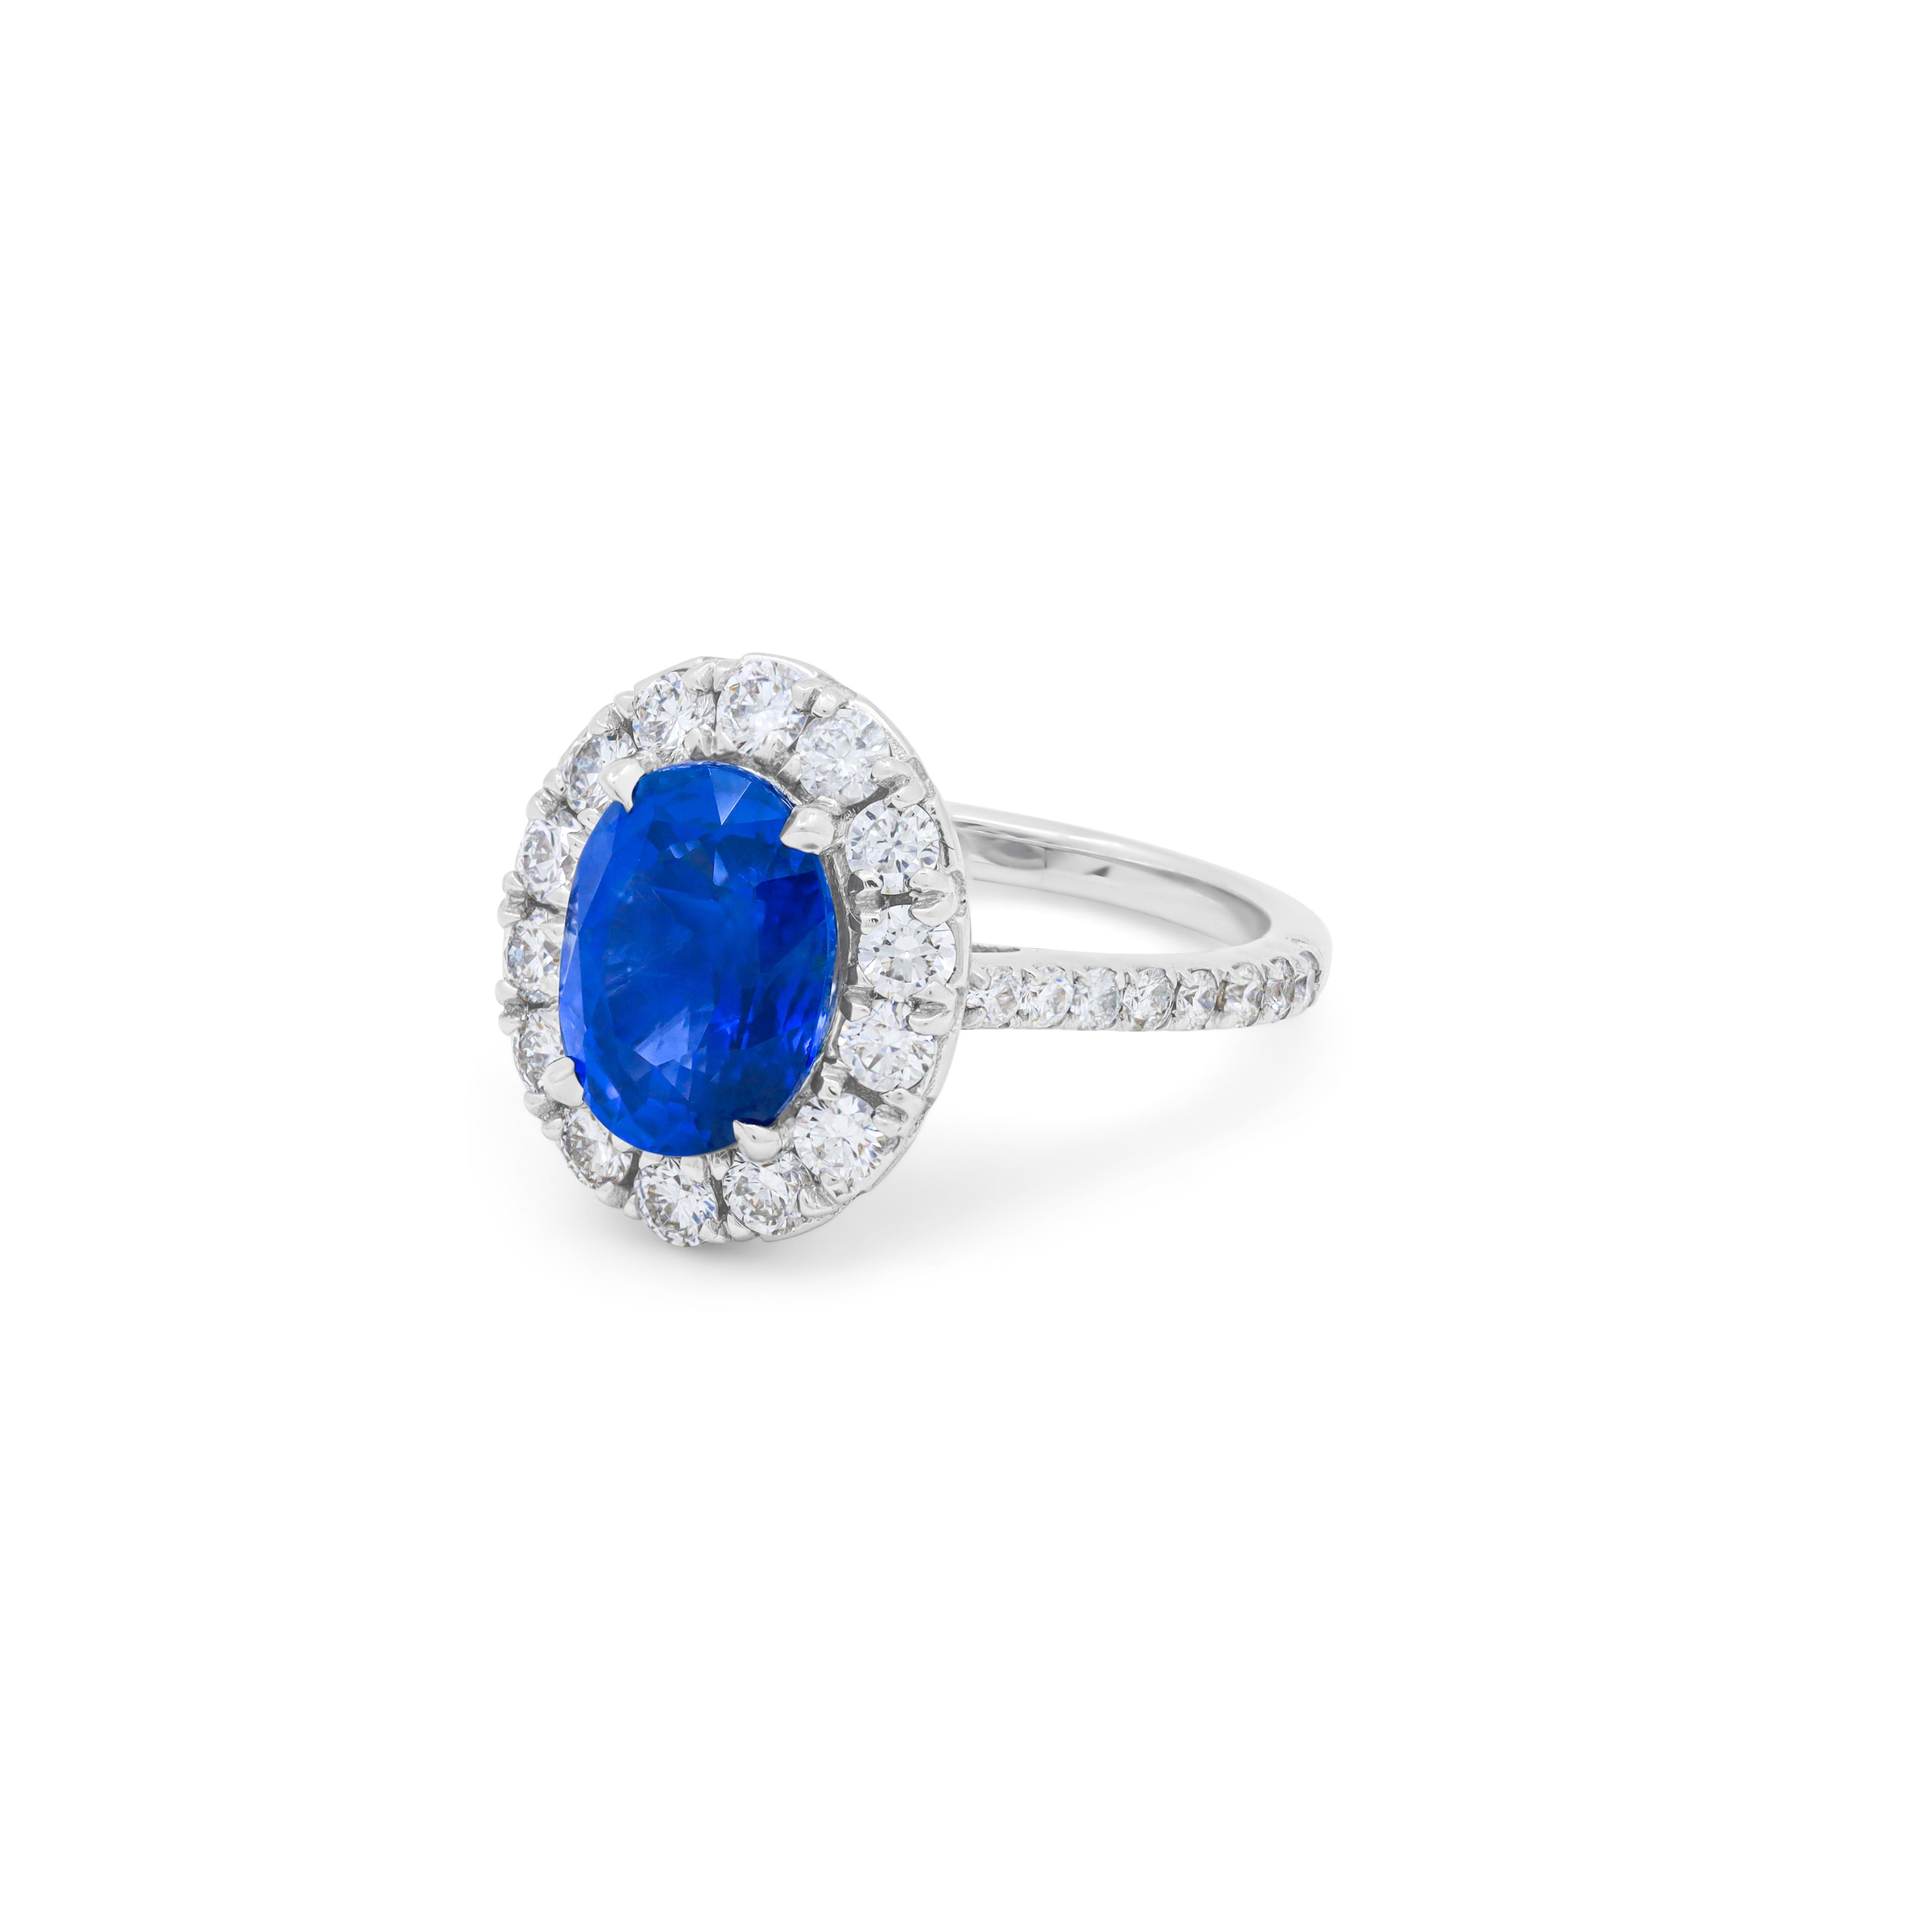 18kt white gold sapphire ring set with 3.60ct sapphire and 1.00cts of diamonds in halo design.
Diana M. is a leading supplier of top-quality fine jewelry for over 35 years.
Diana M is one-stop shop for all your jewelry shopping, carrying line of